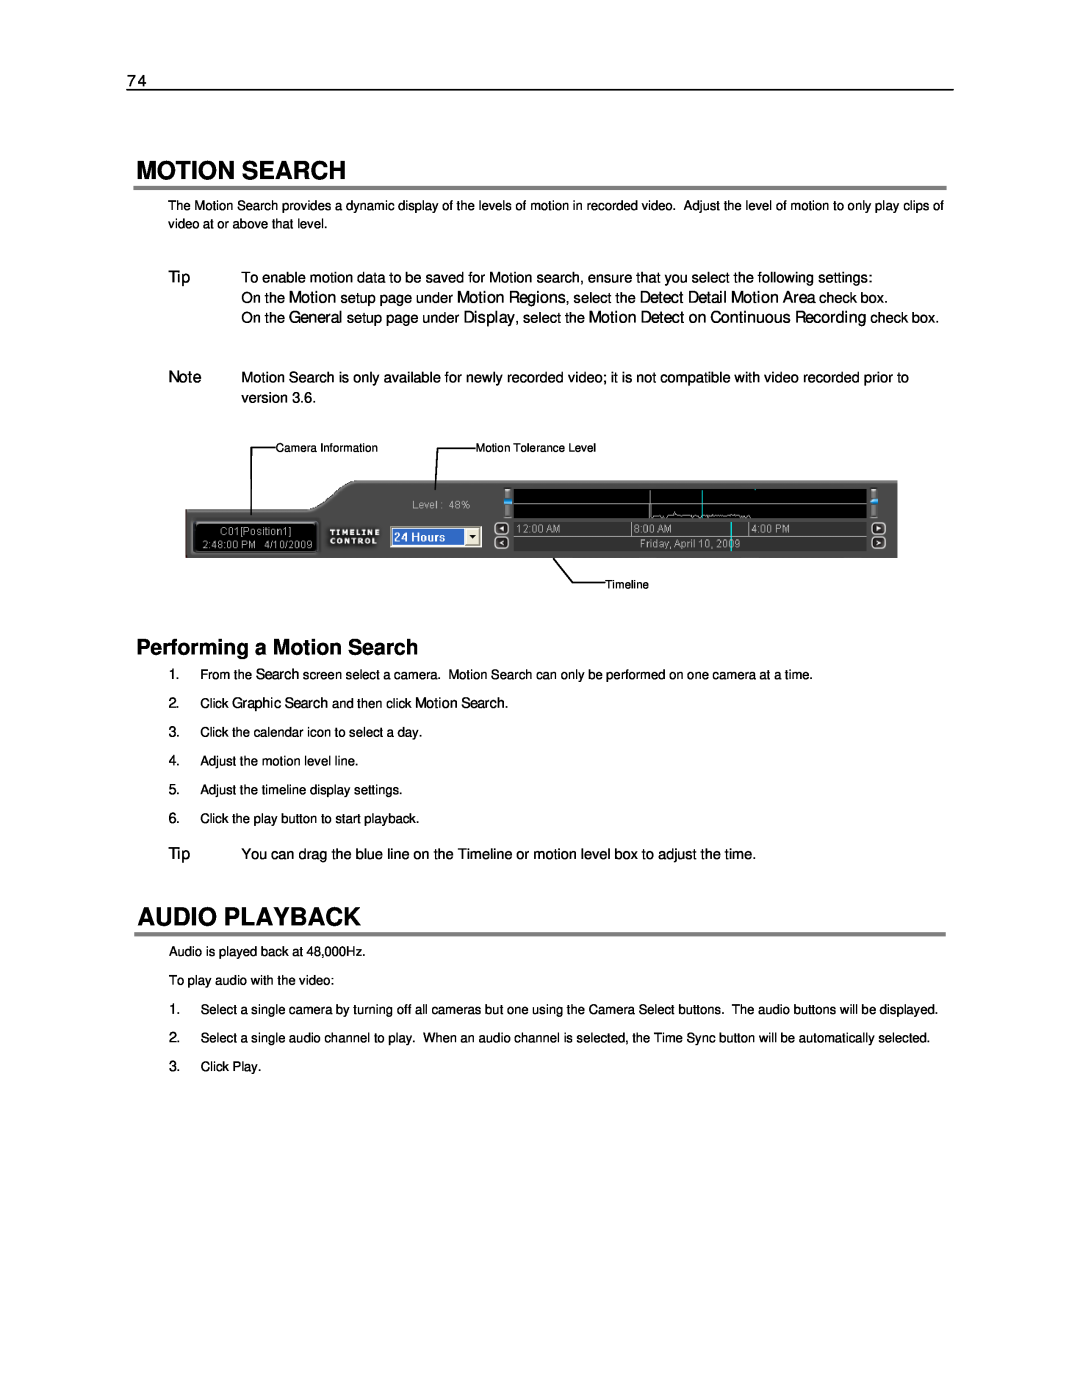 Toshiba NVS8-X, NVS32-X, NVS16-X user manual Audio Playback, Performing a Motion Search 